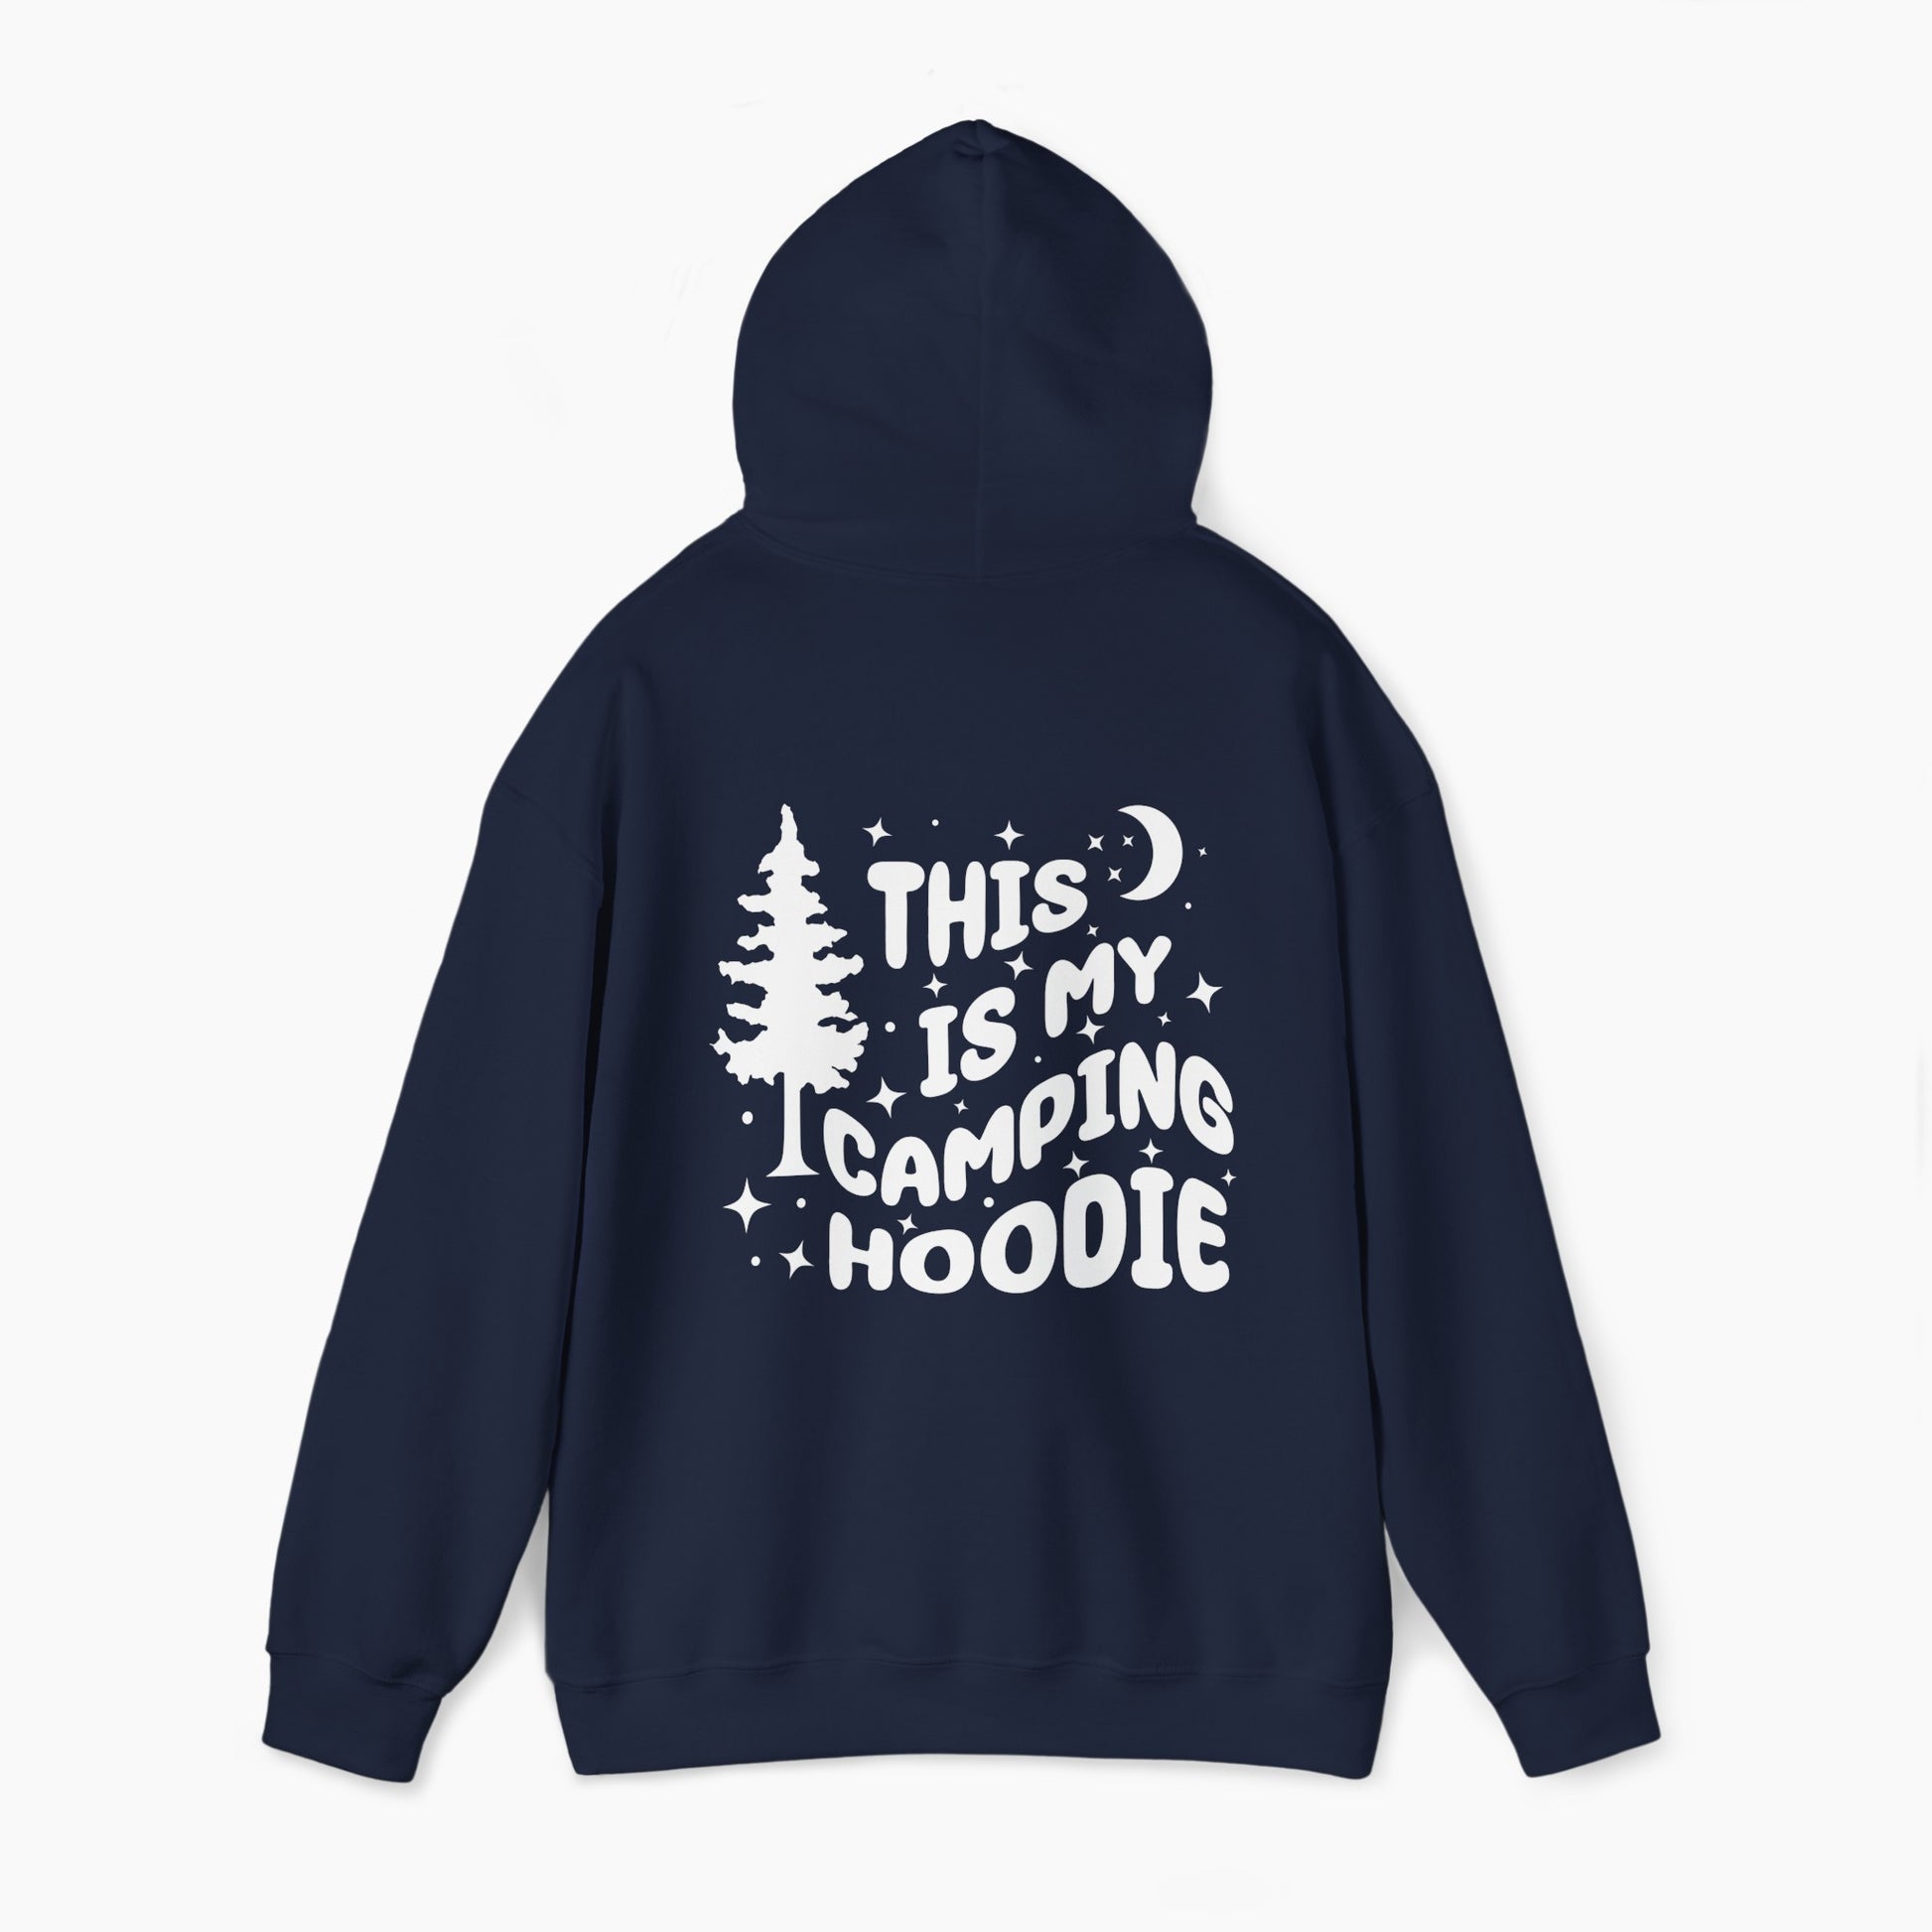 Back of a blue hoodie featuring the text 'This is my camping hoodie,' with a design of a camping van, moon, stars, and a tree on a plain background.